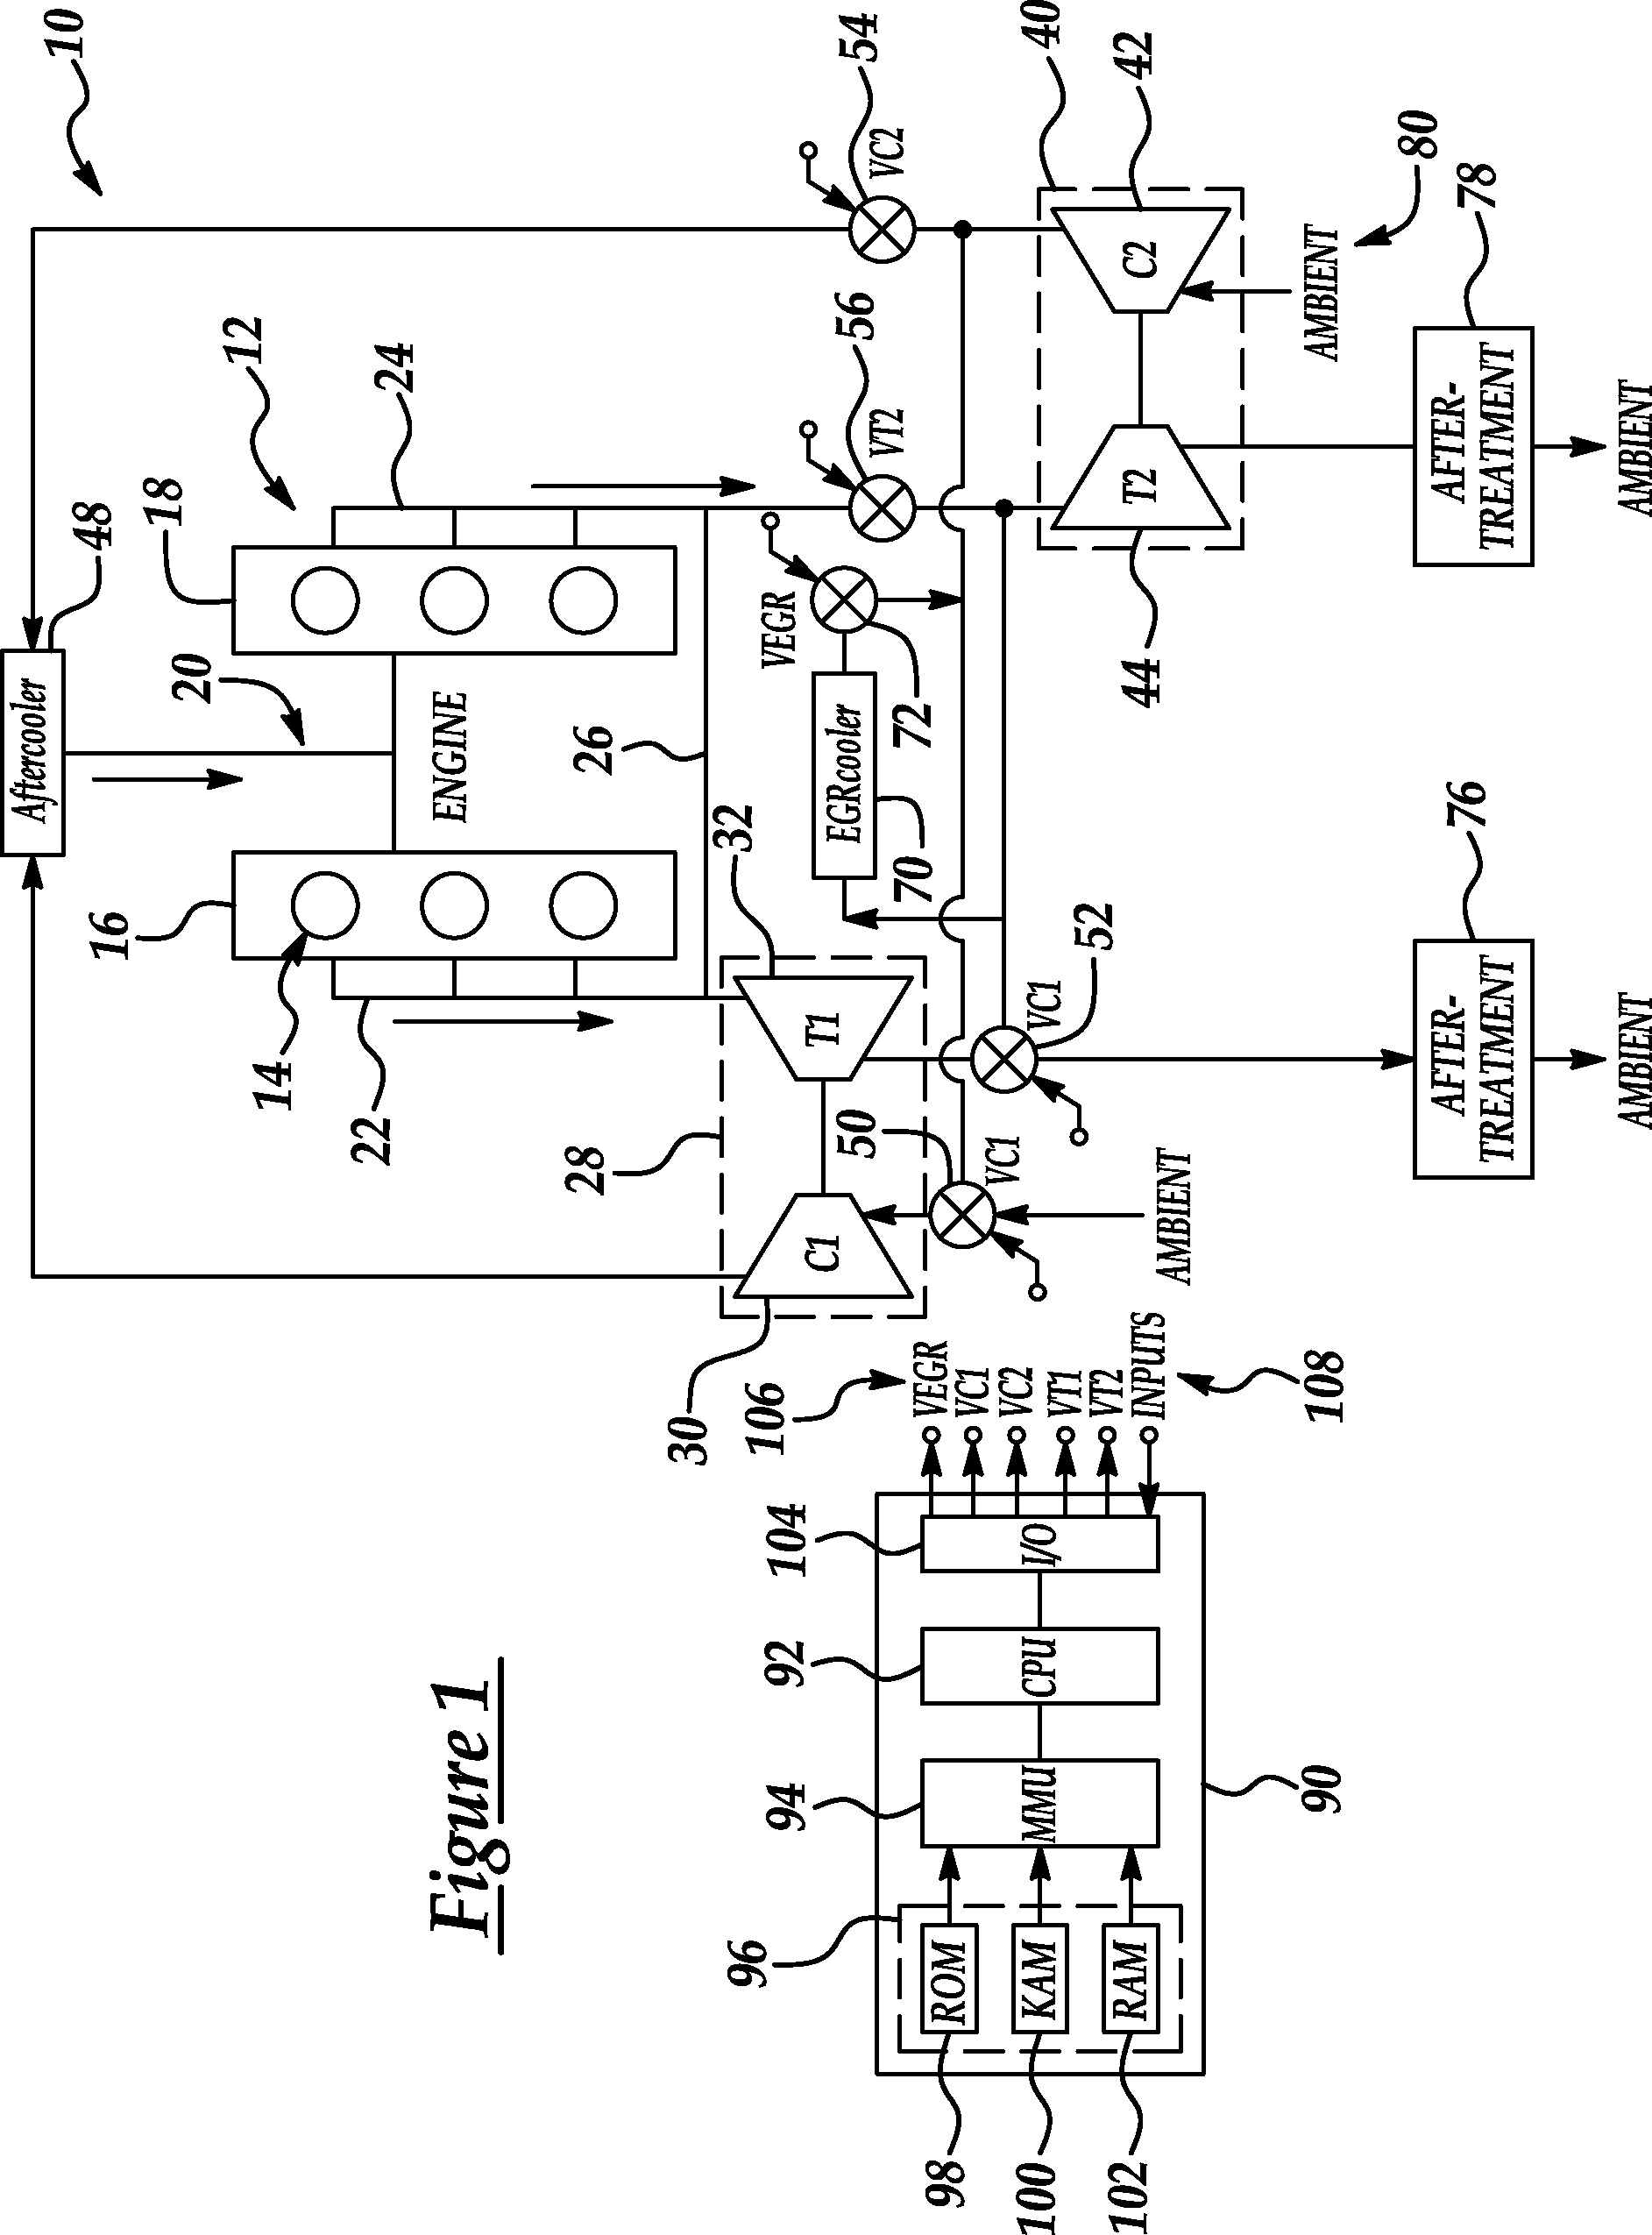 Series/parallel turbochargers and switchable high/low pressure EGR for internal combustion engines